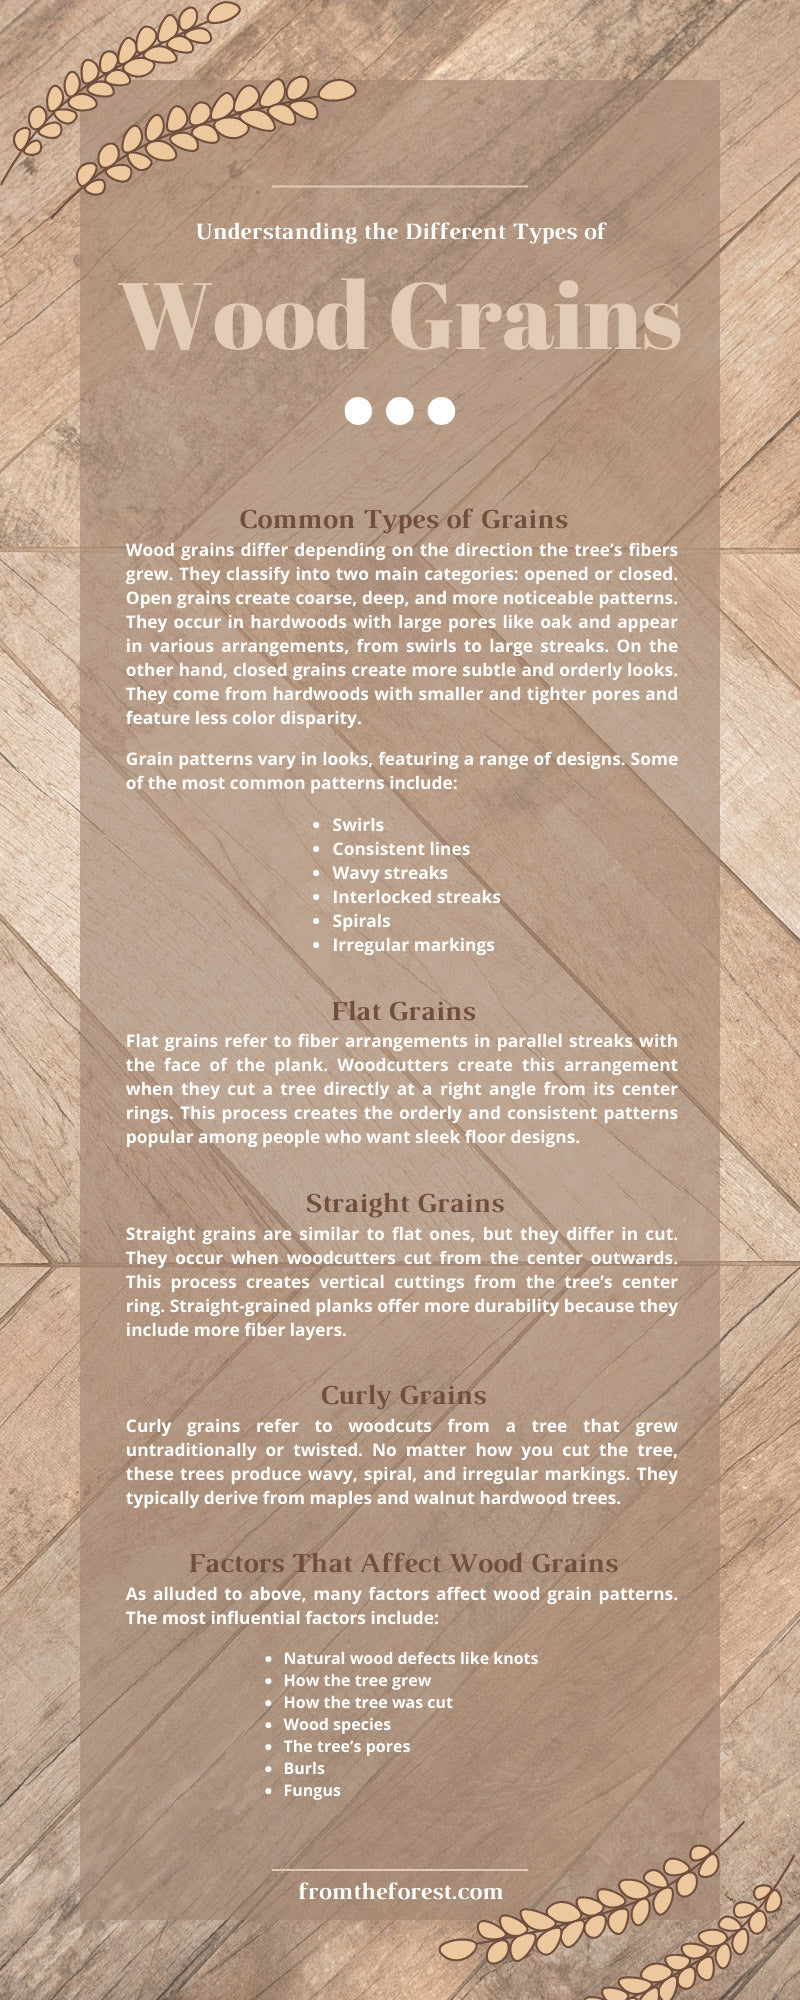 Understanding the Different Types of Wood Grains